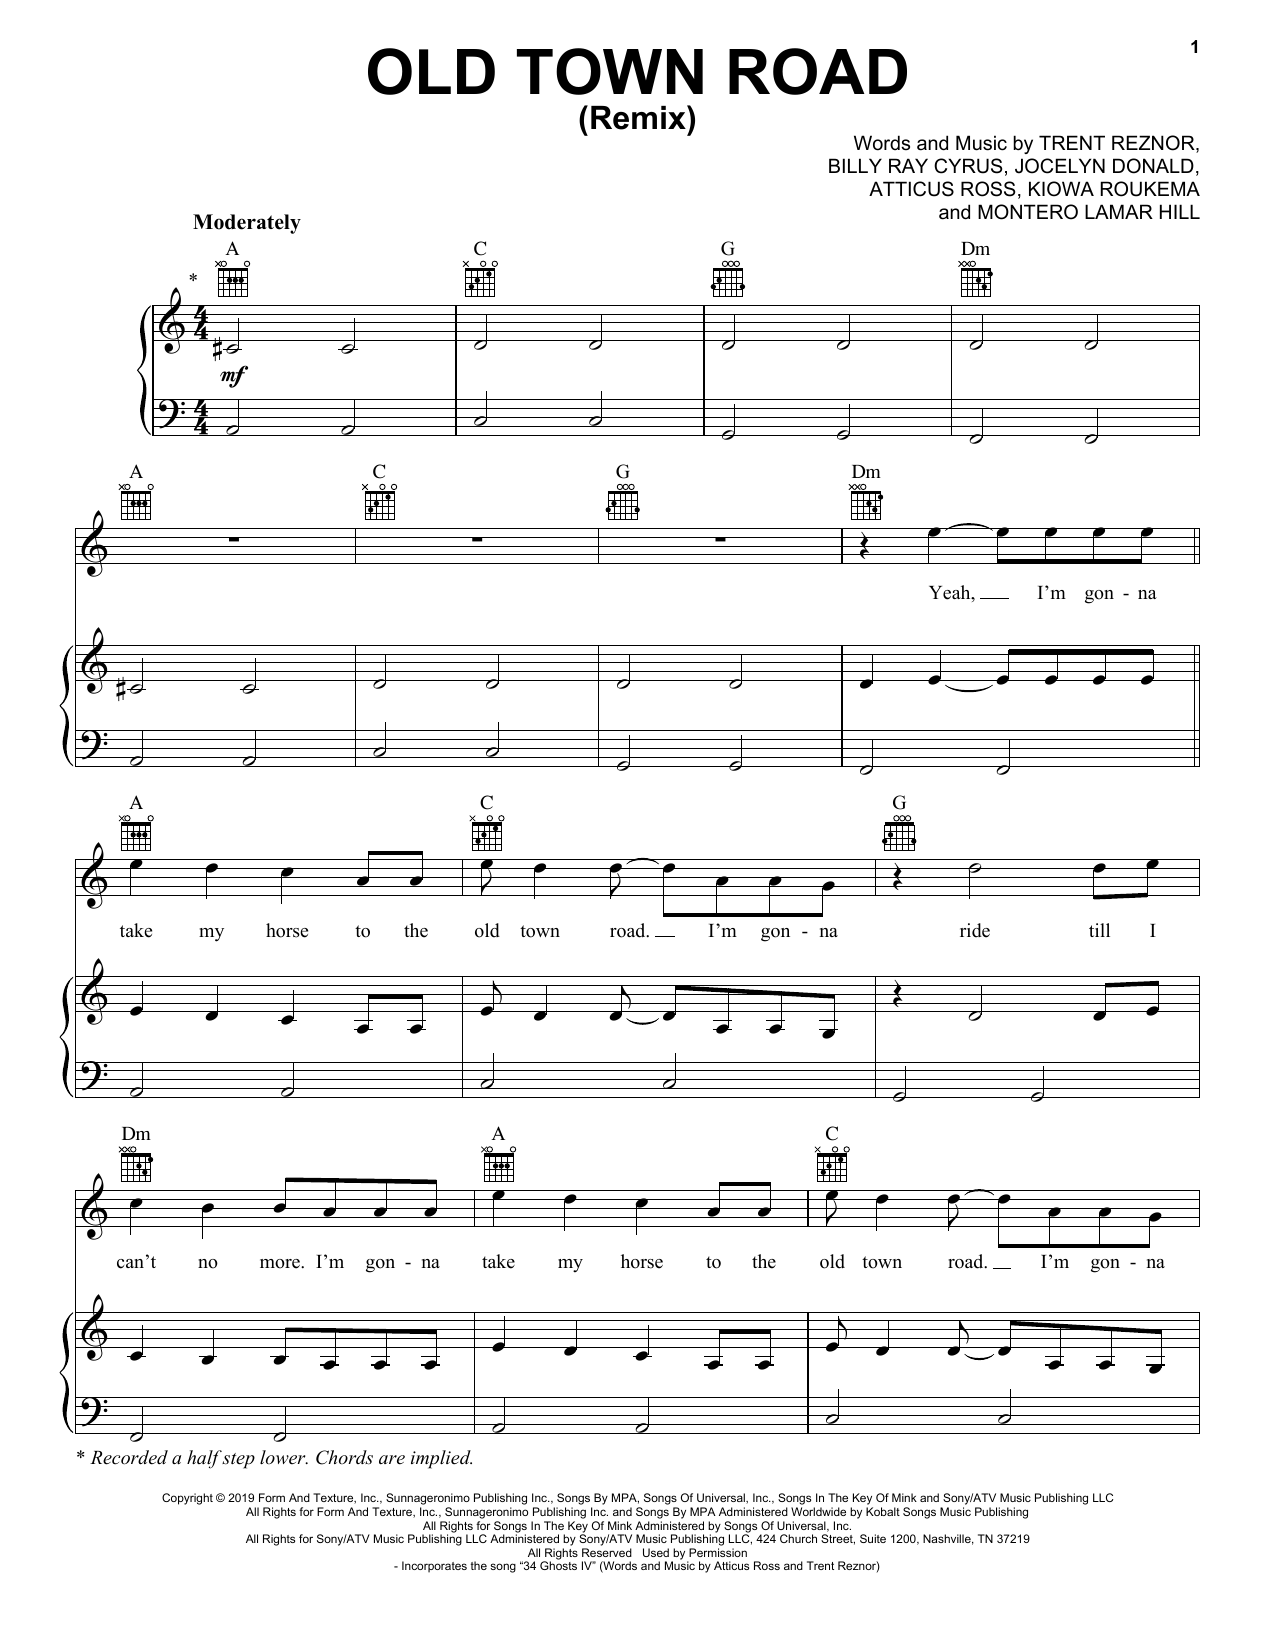 Lil Nas X feat. Billy Ray Cyrus Old Town Road (Remix) sheet music notes printable PDF score